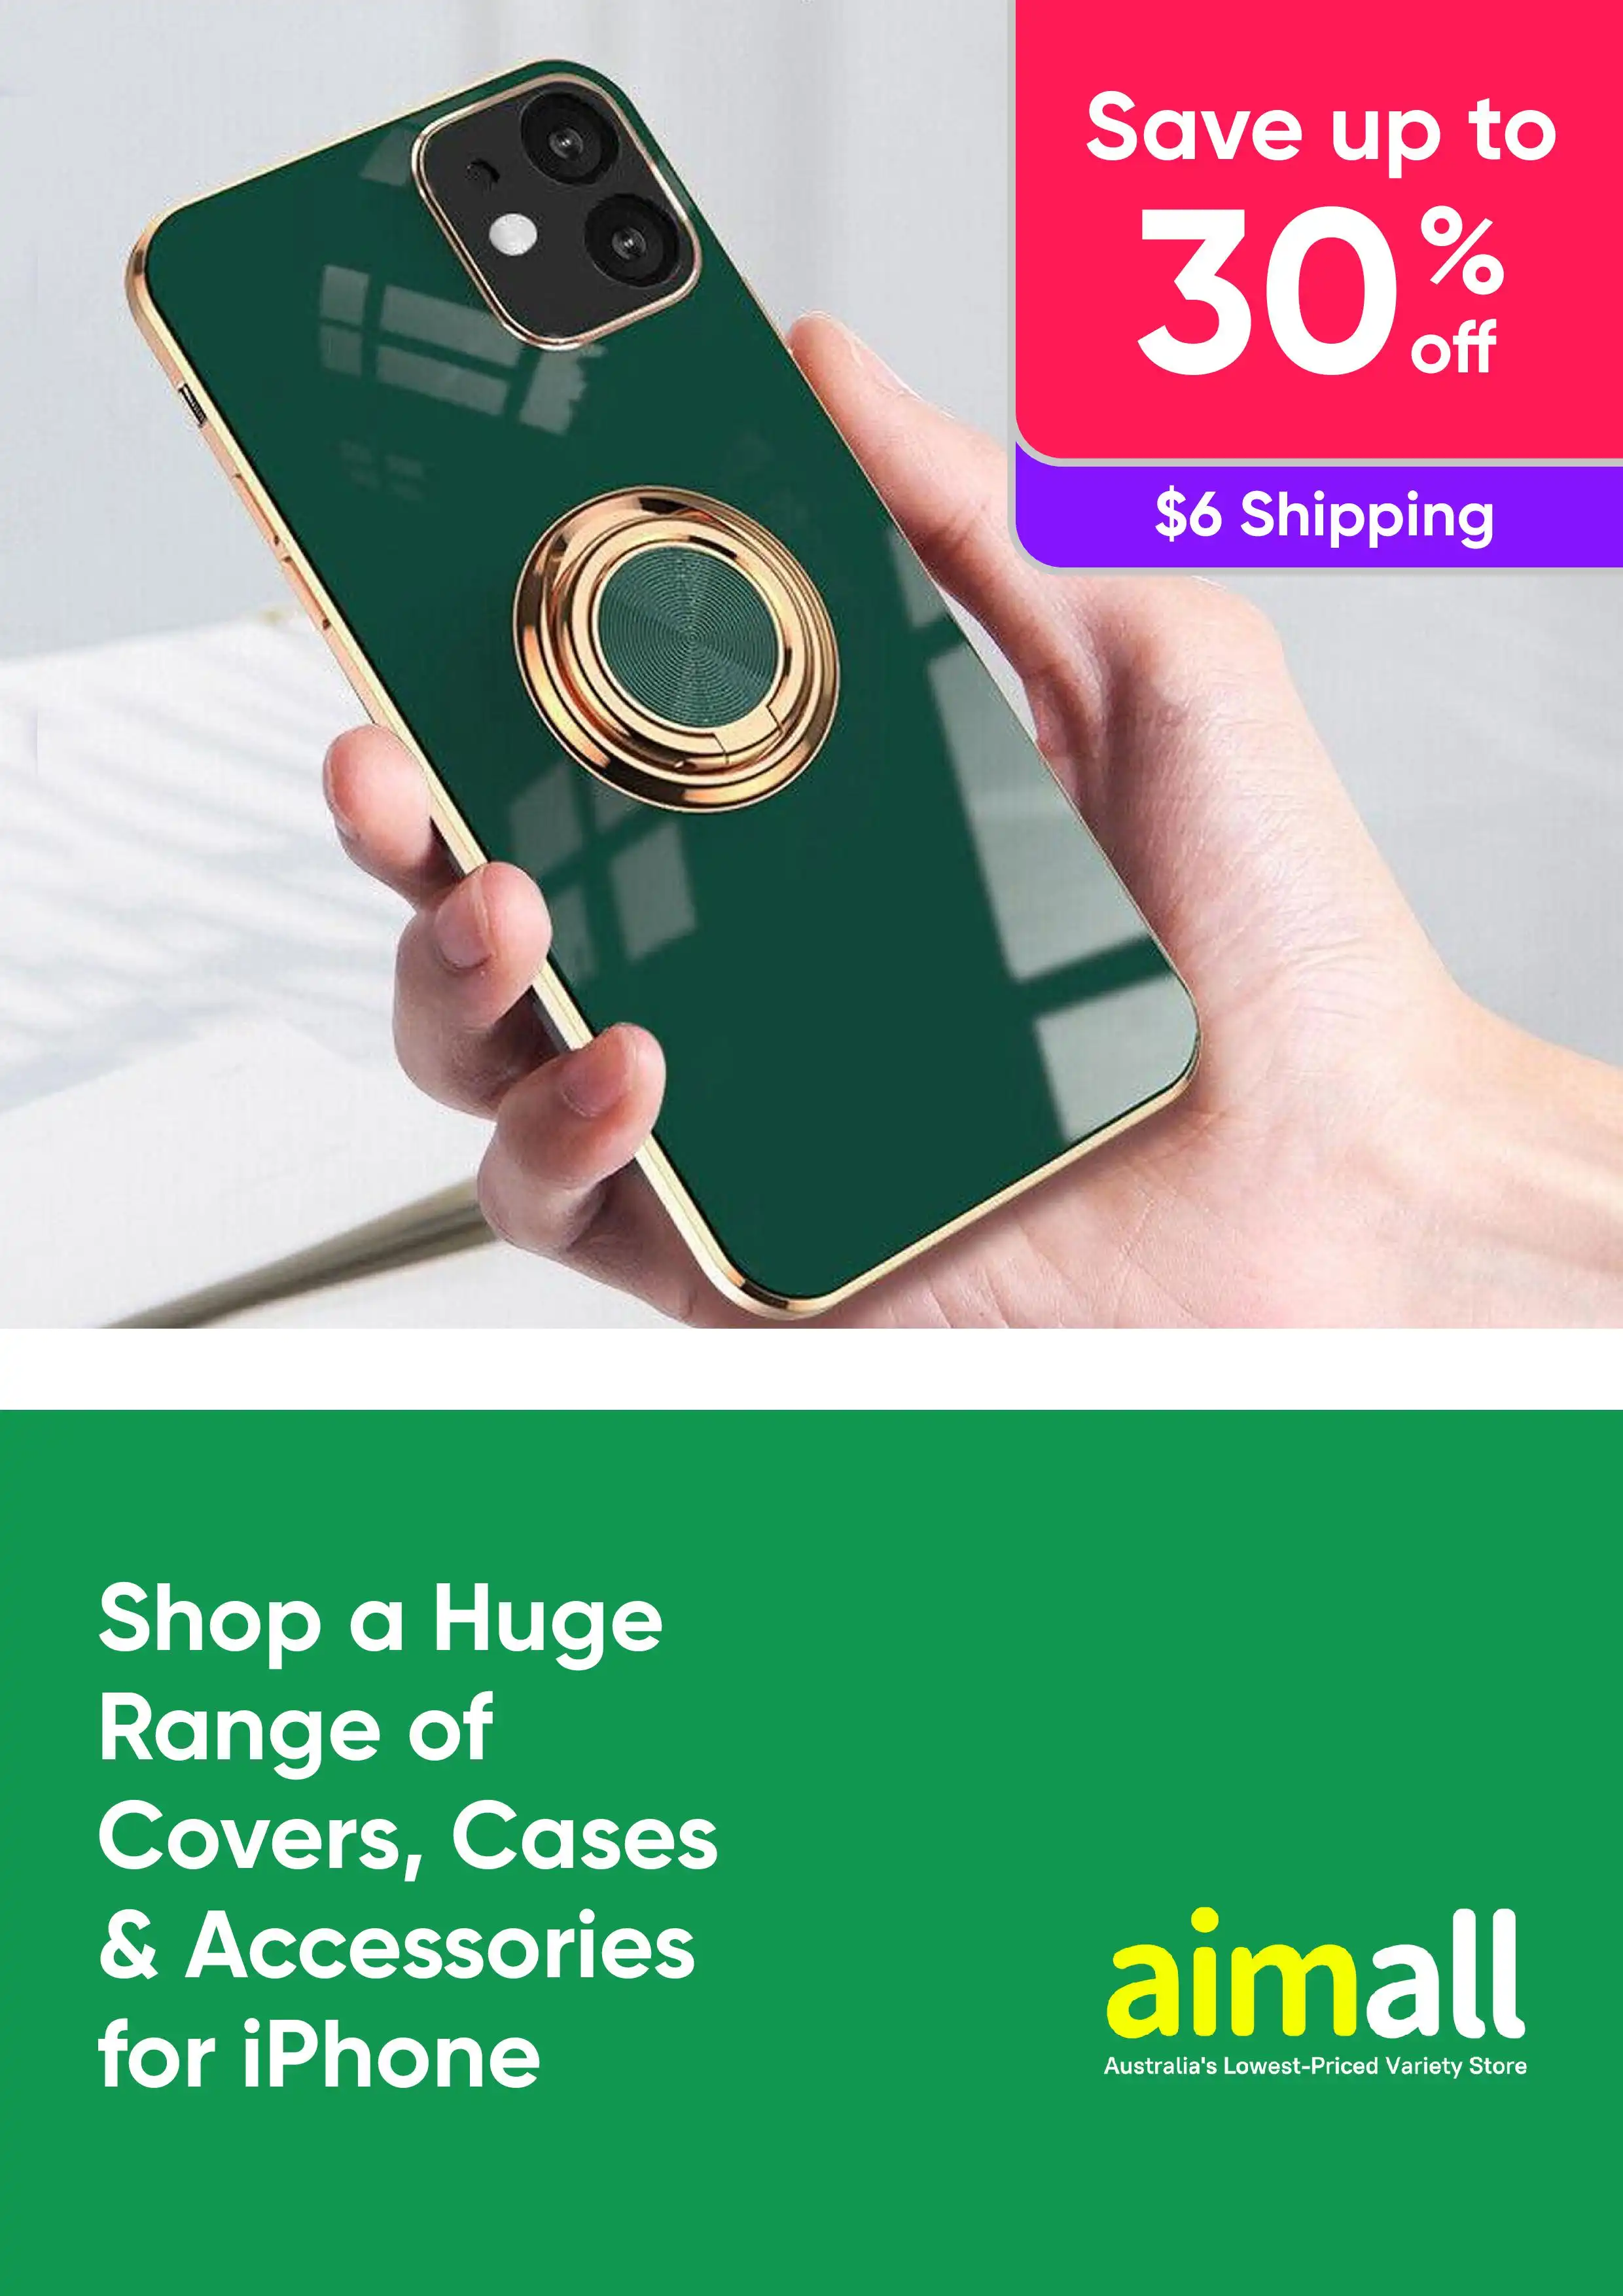 Up to 30% a huge range of Covers, Cases & Accessories for iPhone